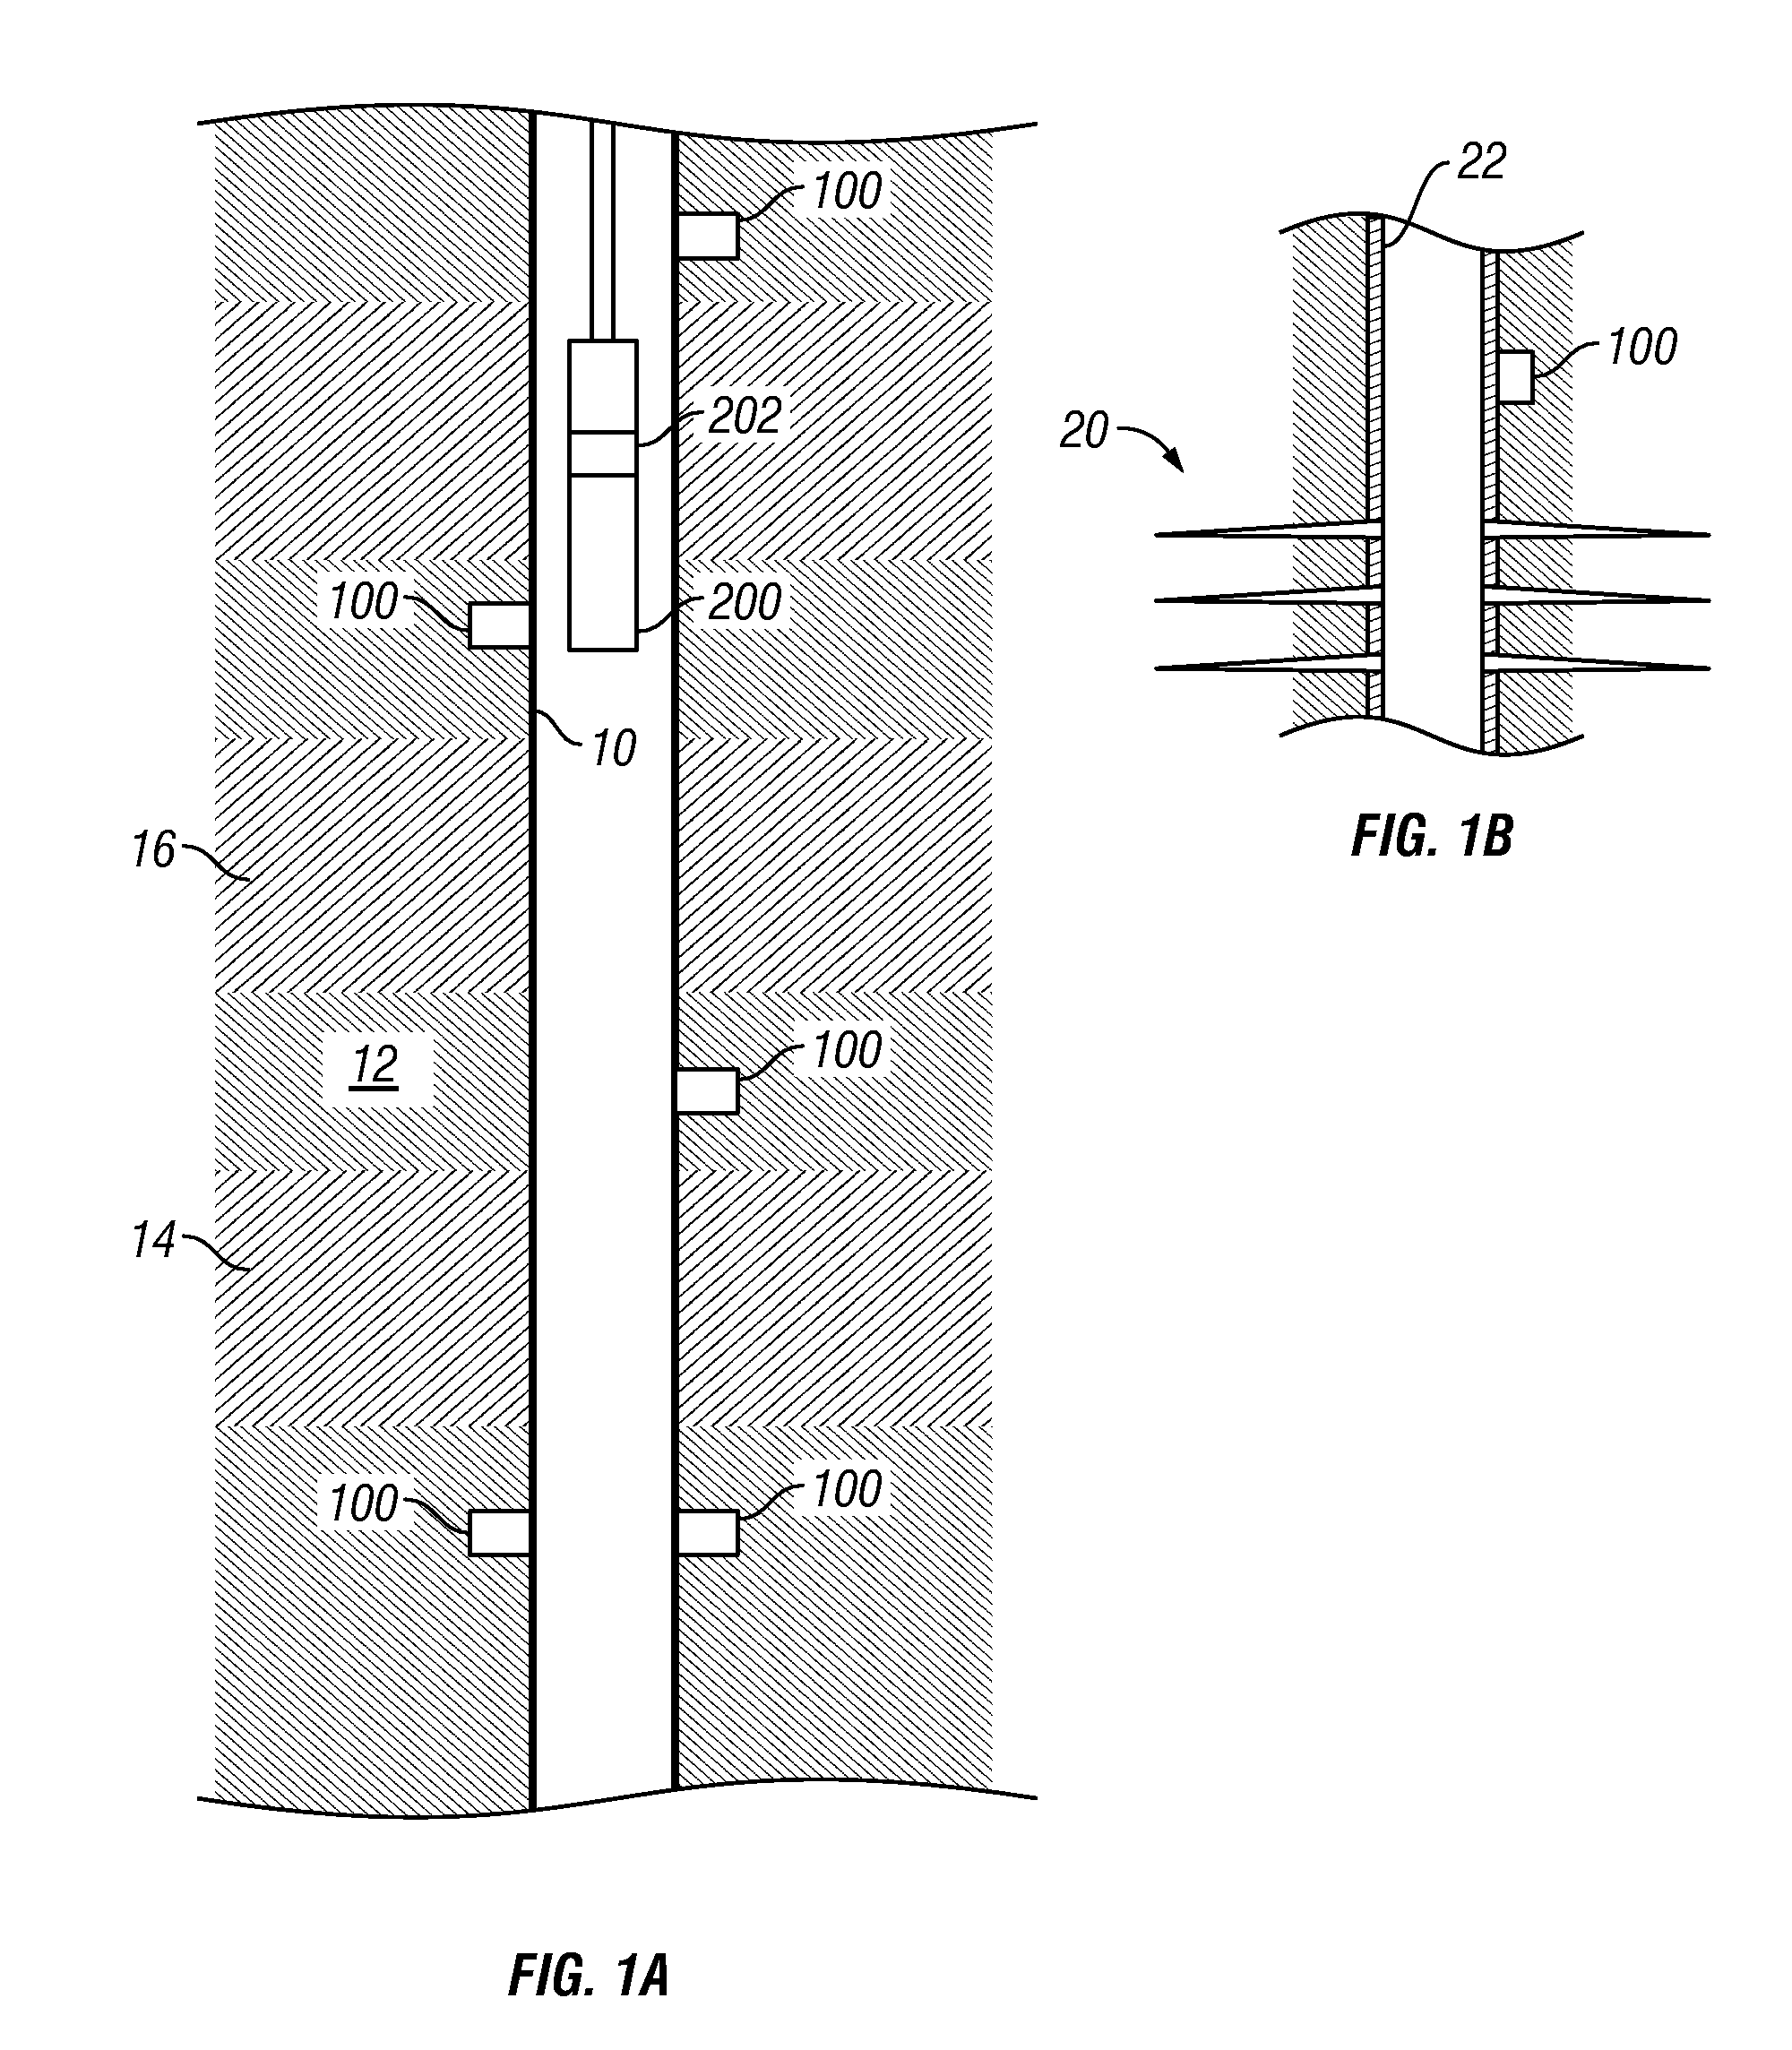 Tagging a Formation for Use in Wellbore Related Operations